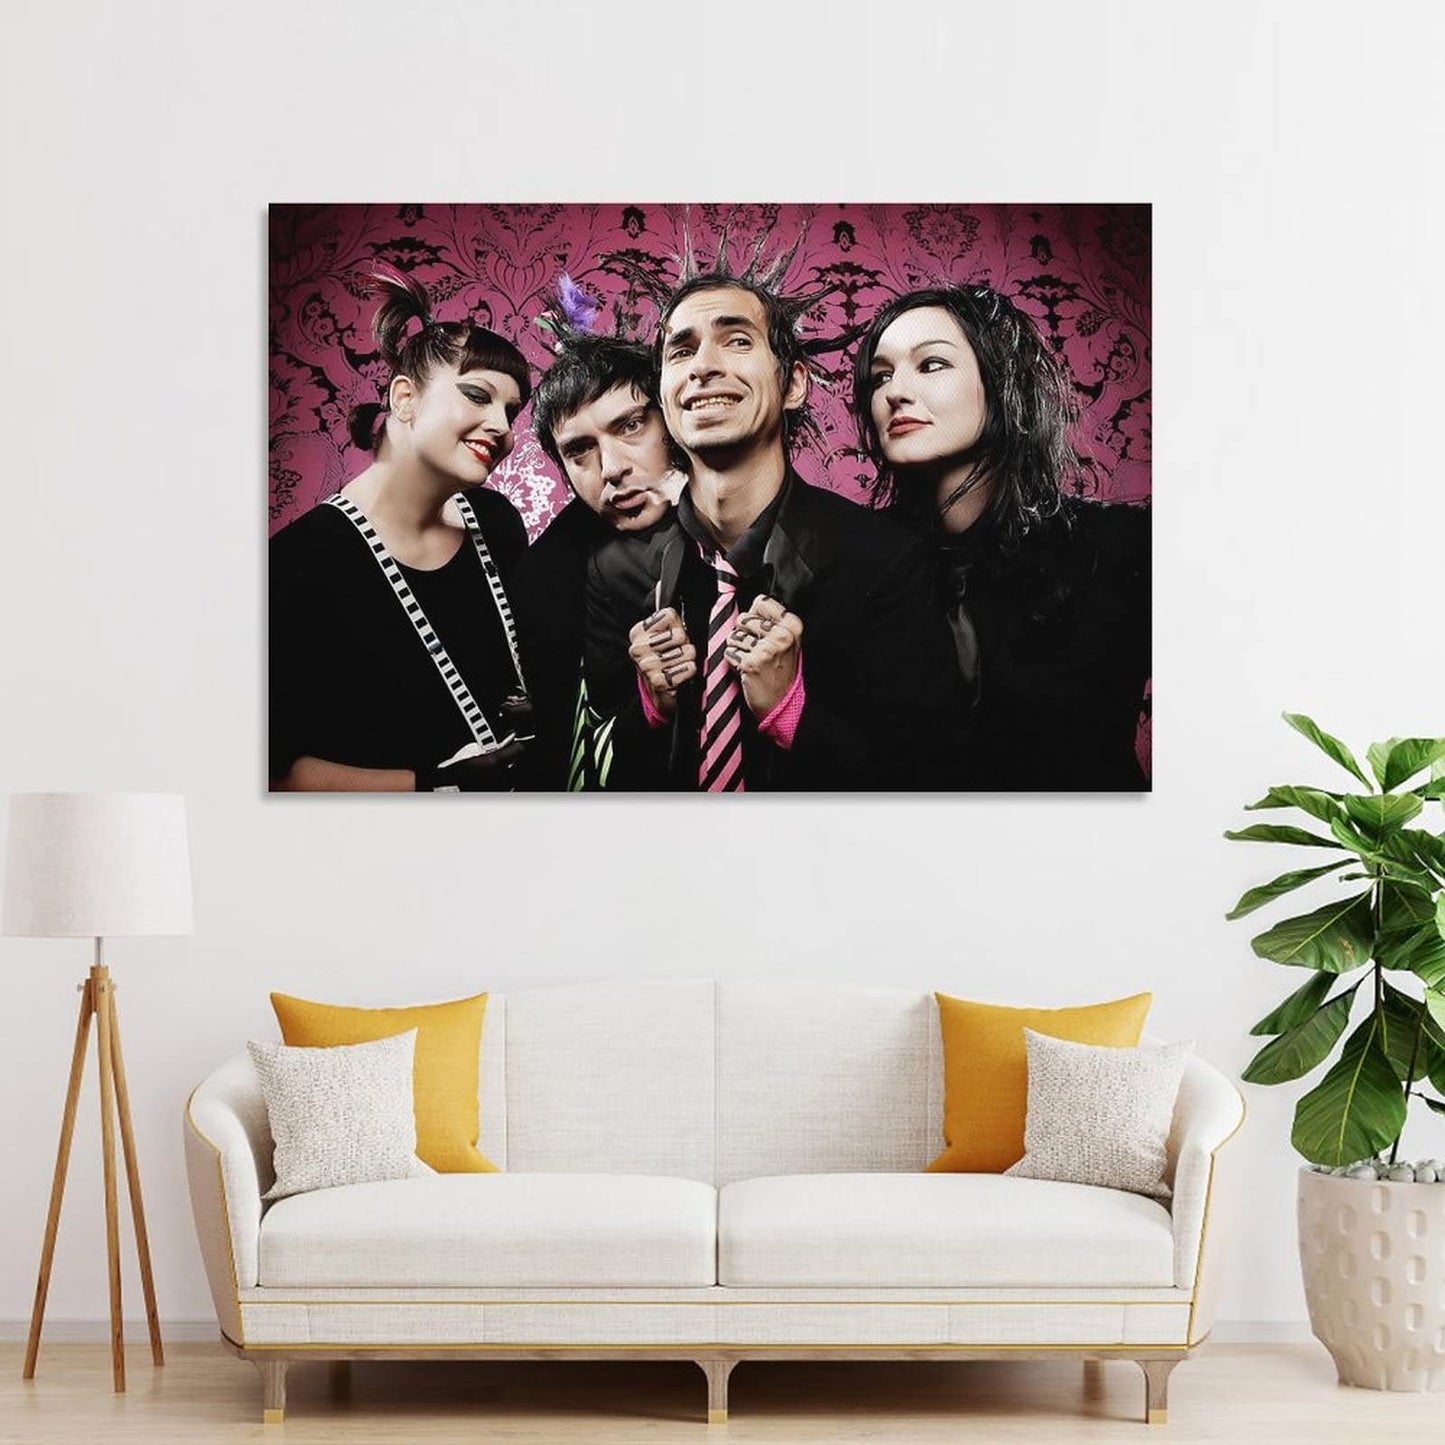 HOWhite Mindless Self Indulgence Poster Punk Band Canvas Art Poster And Wall Art Picture Print Modern Family Bedroom Decor Posters 12x18inch(30x45cm)